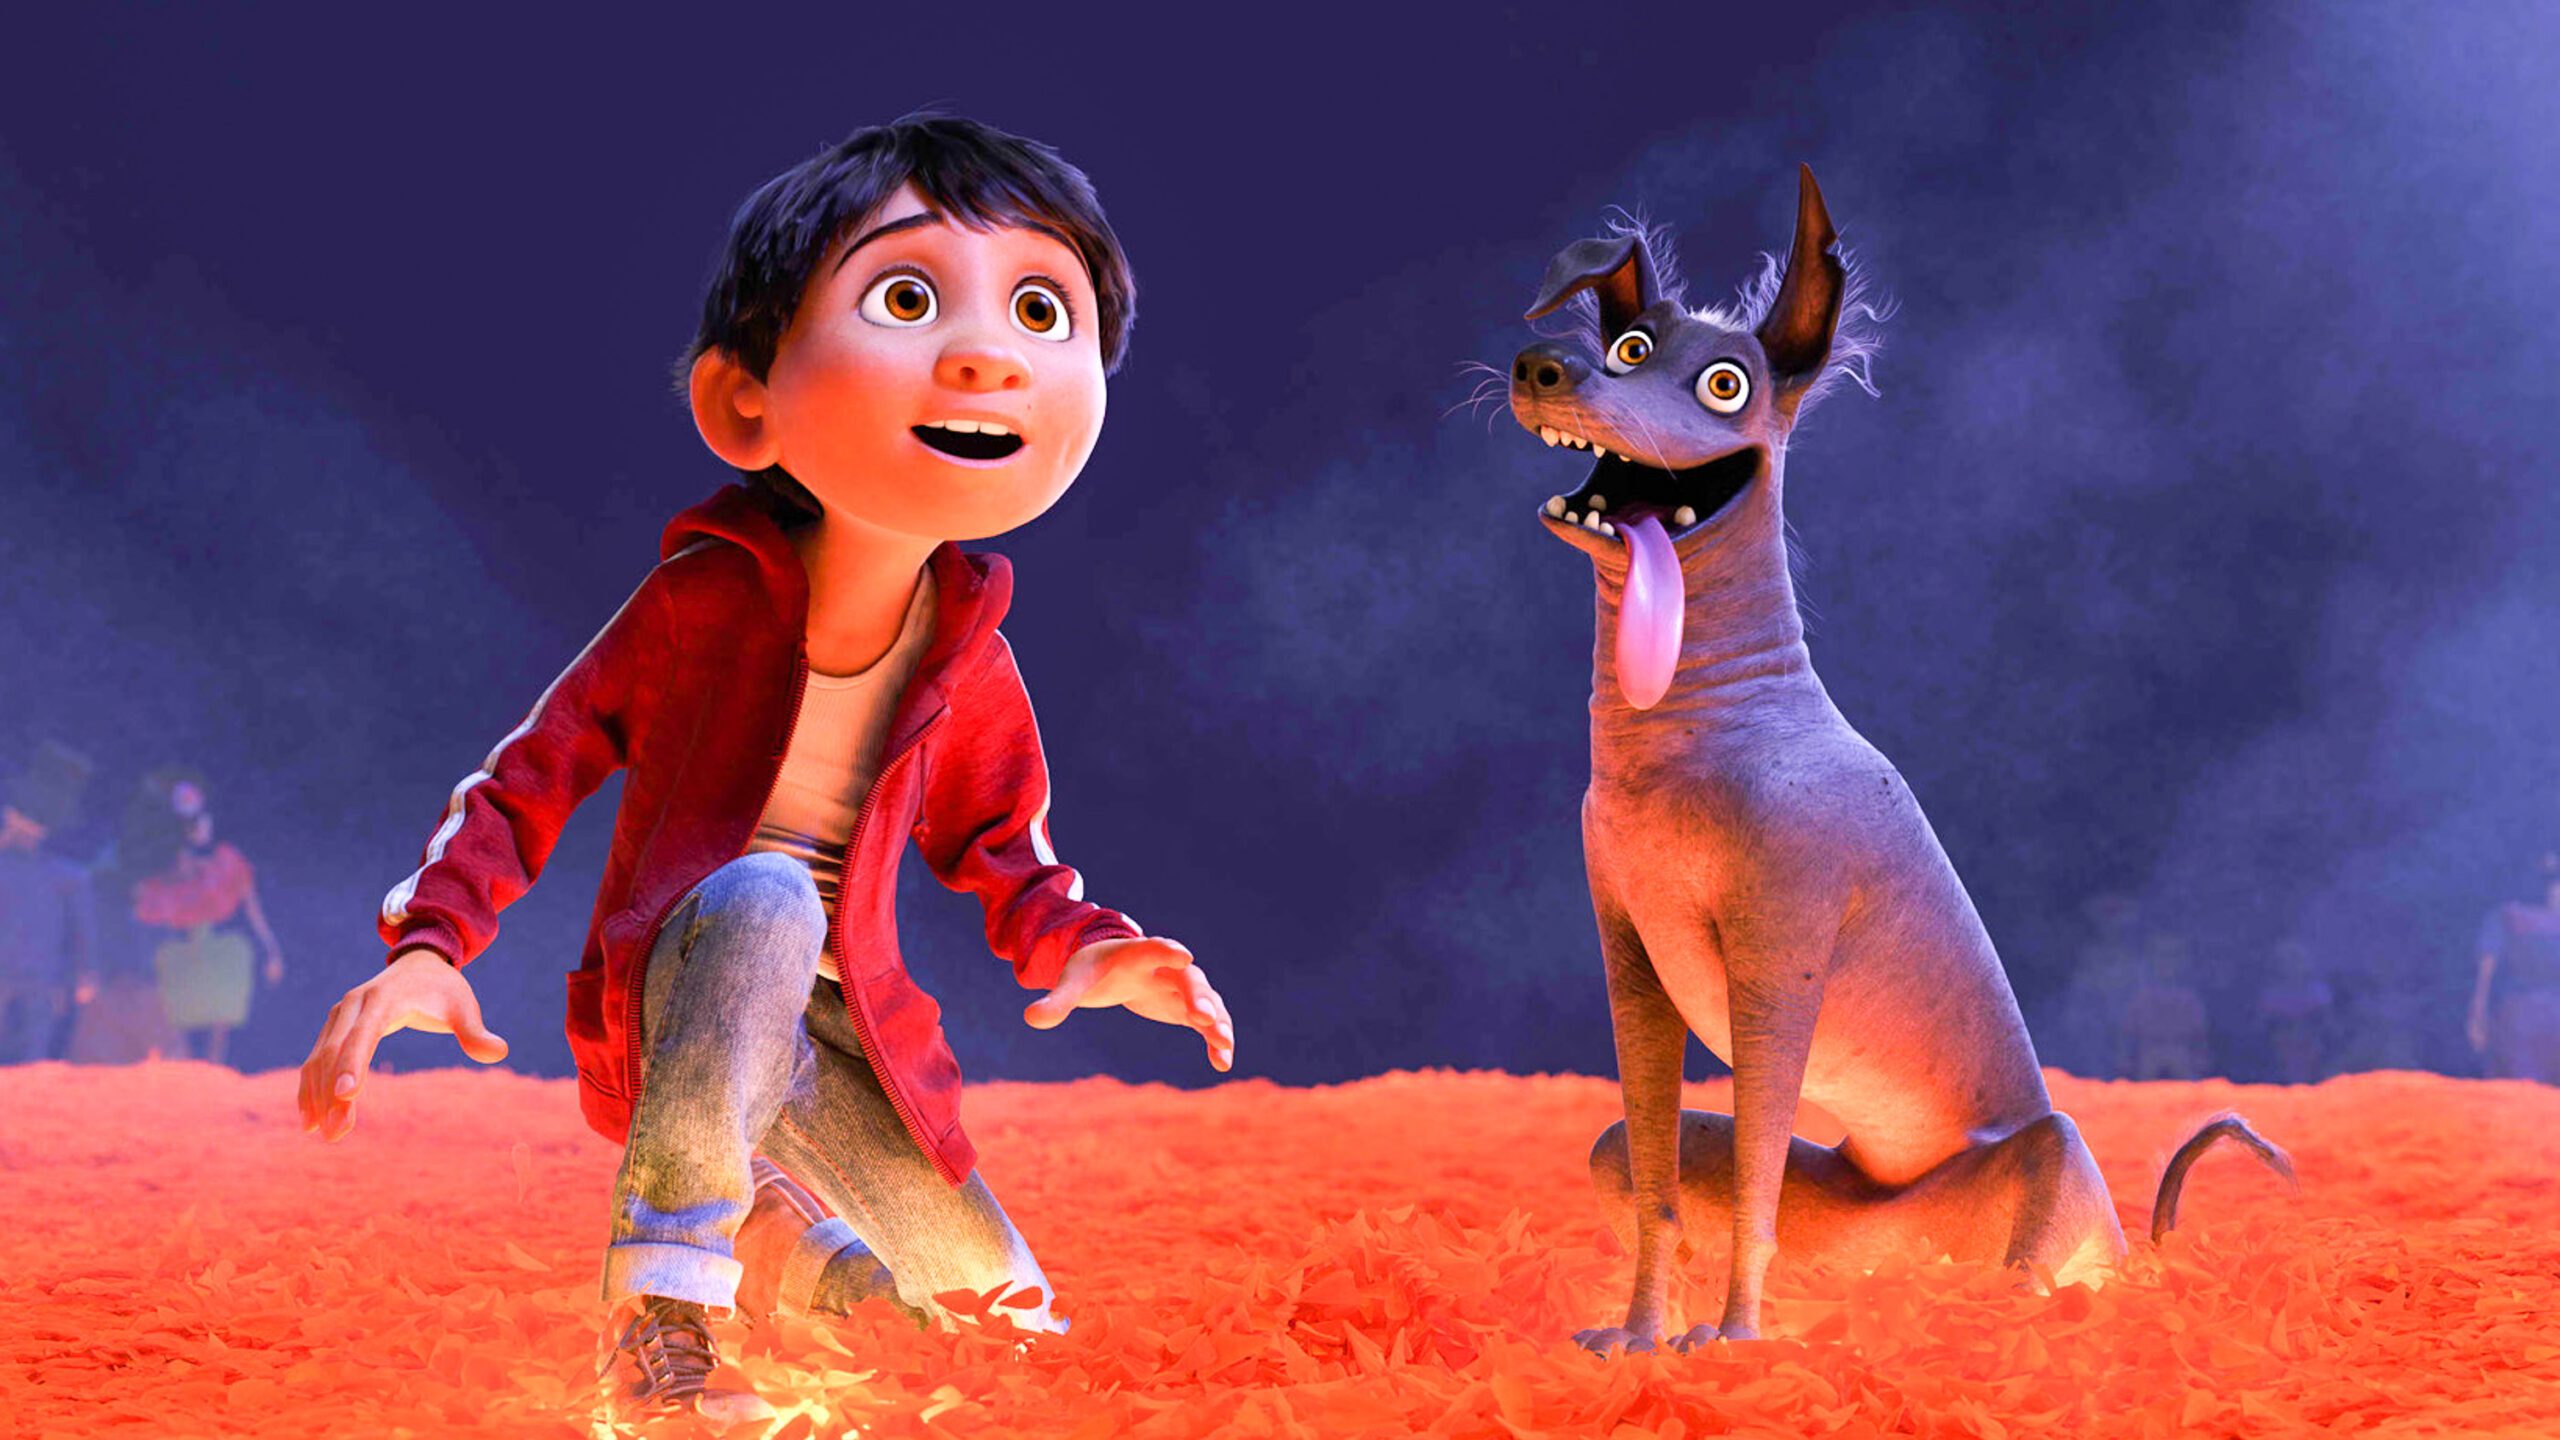 WATCH: Disney releases colorful new trailer for 'Coco